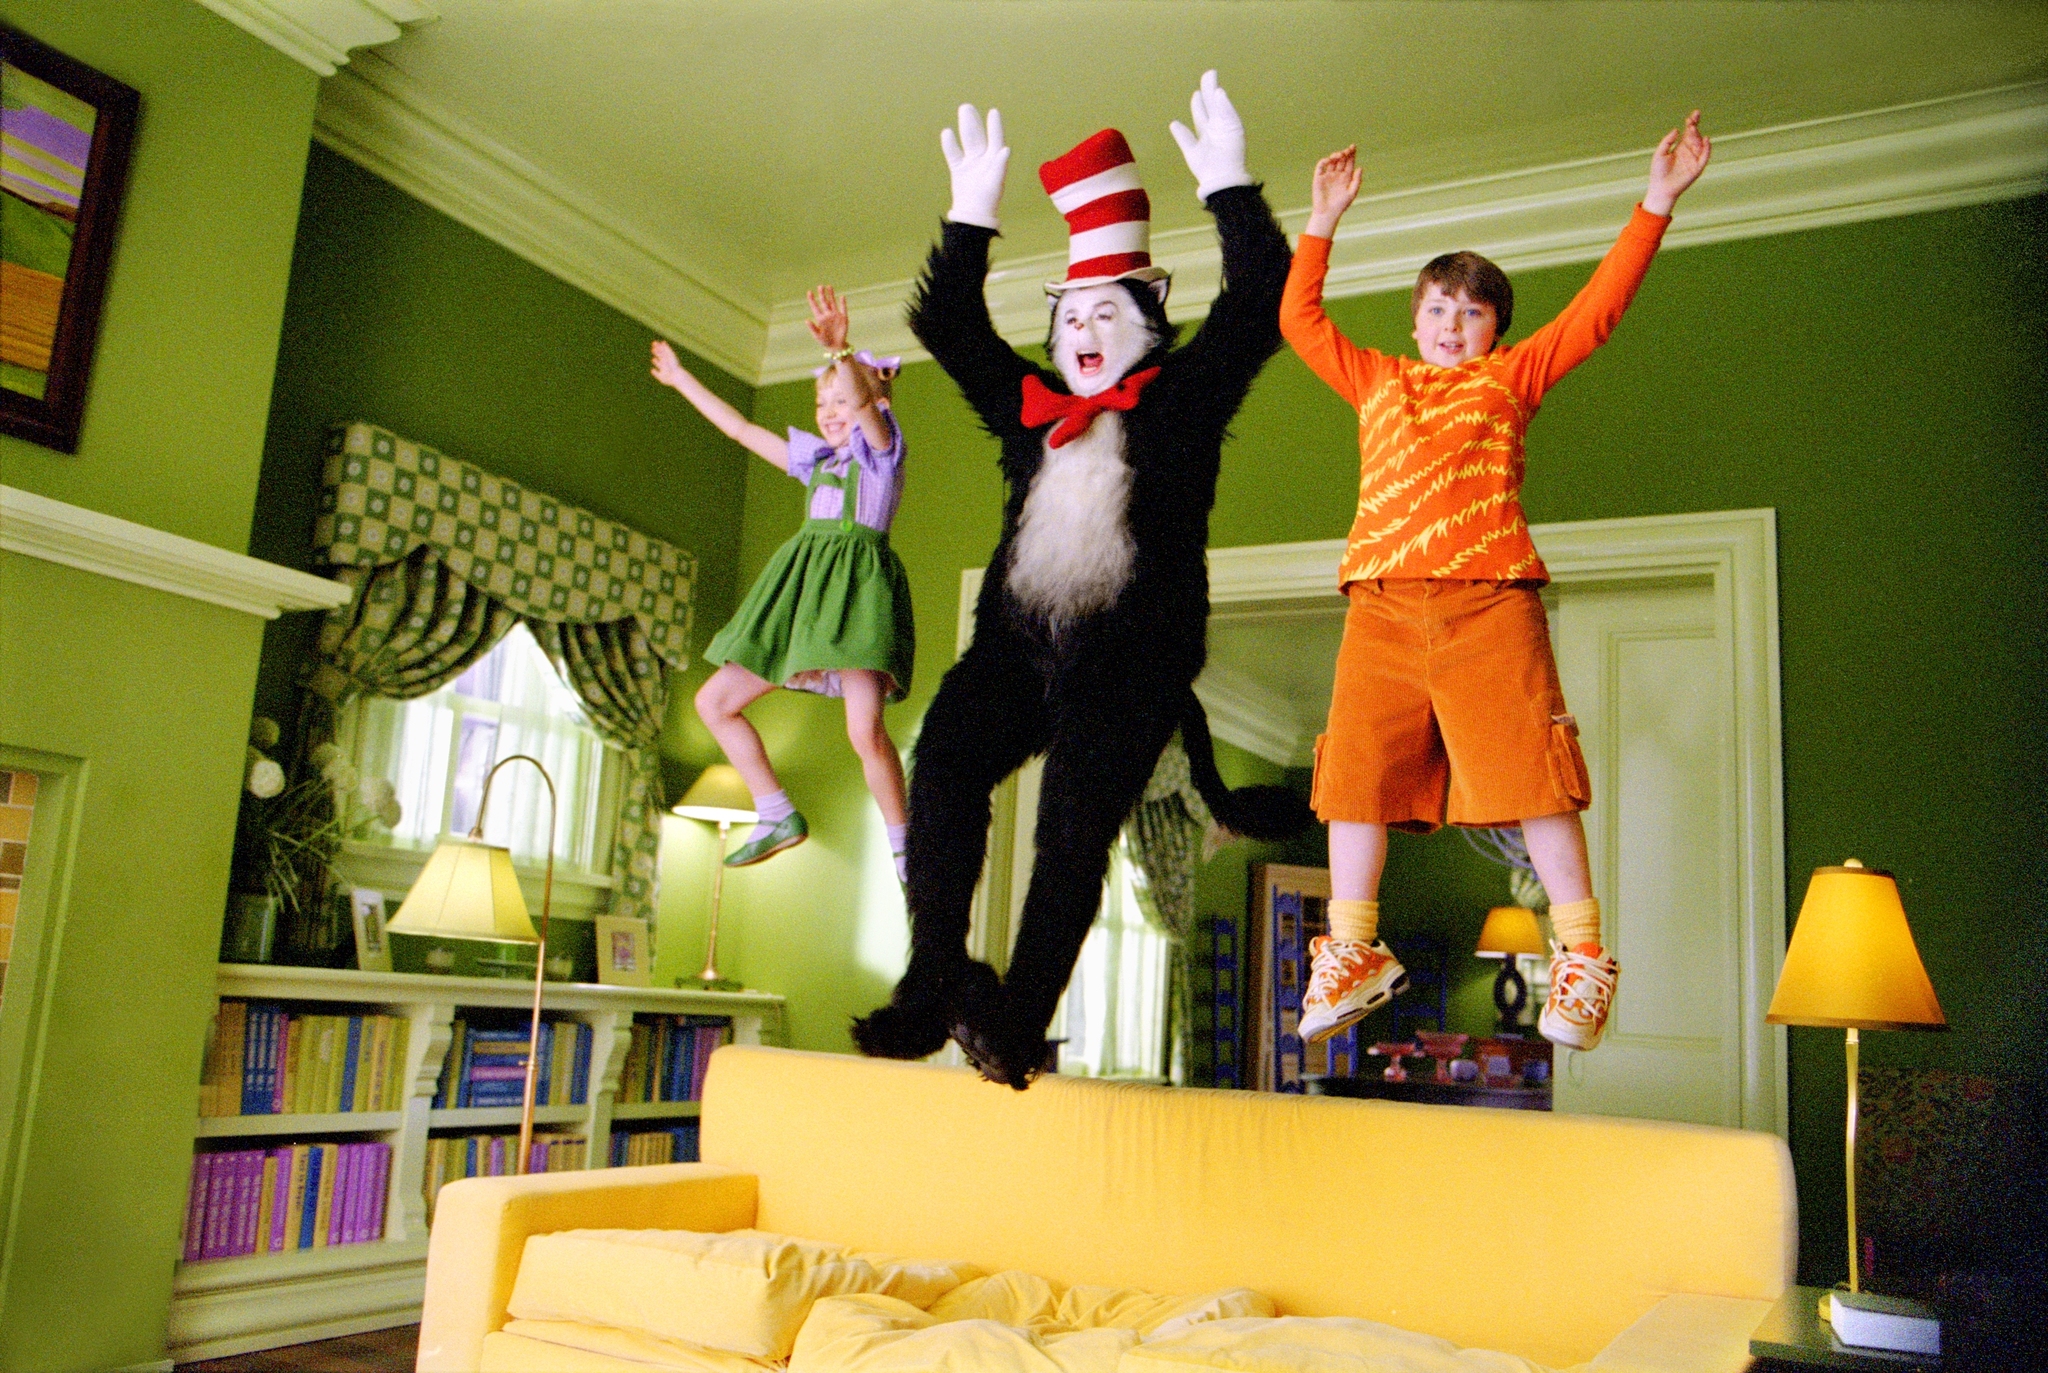 Still of Mike Myers, Spencer Breslin and Dakota Fanning in Dr. Seuss' The Cat in the Hat (2003)